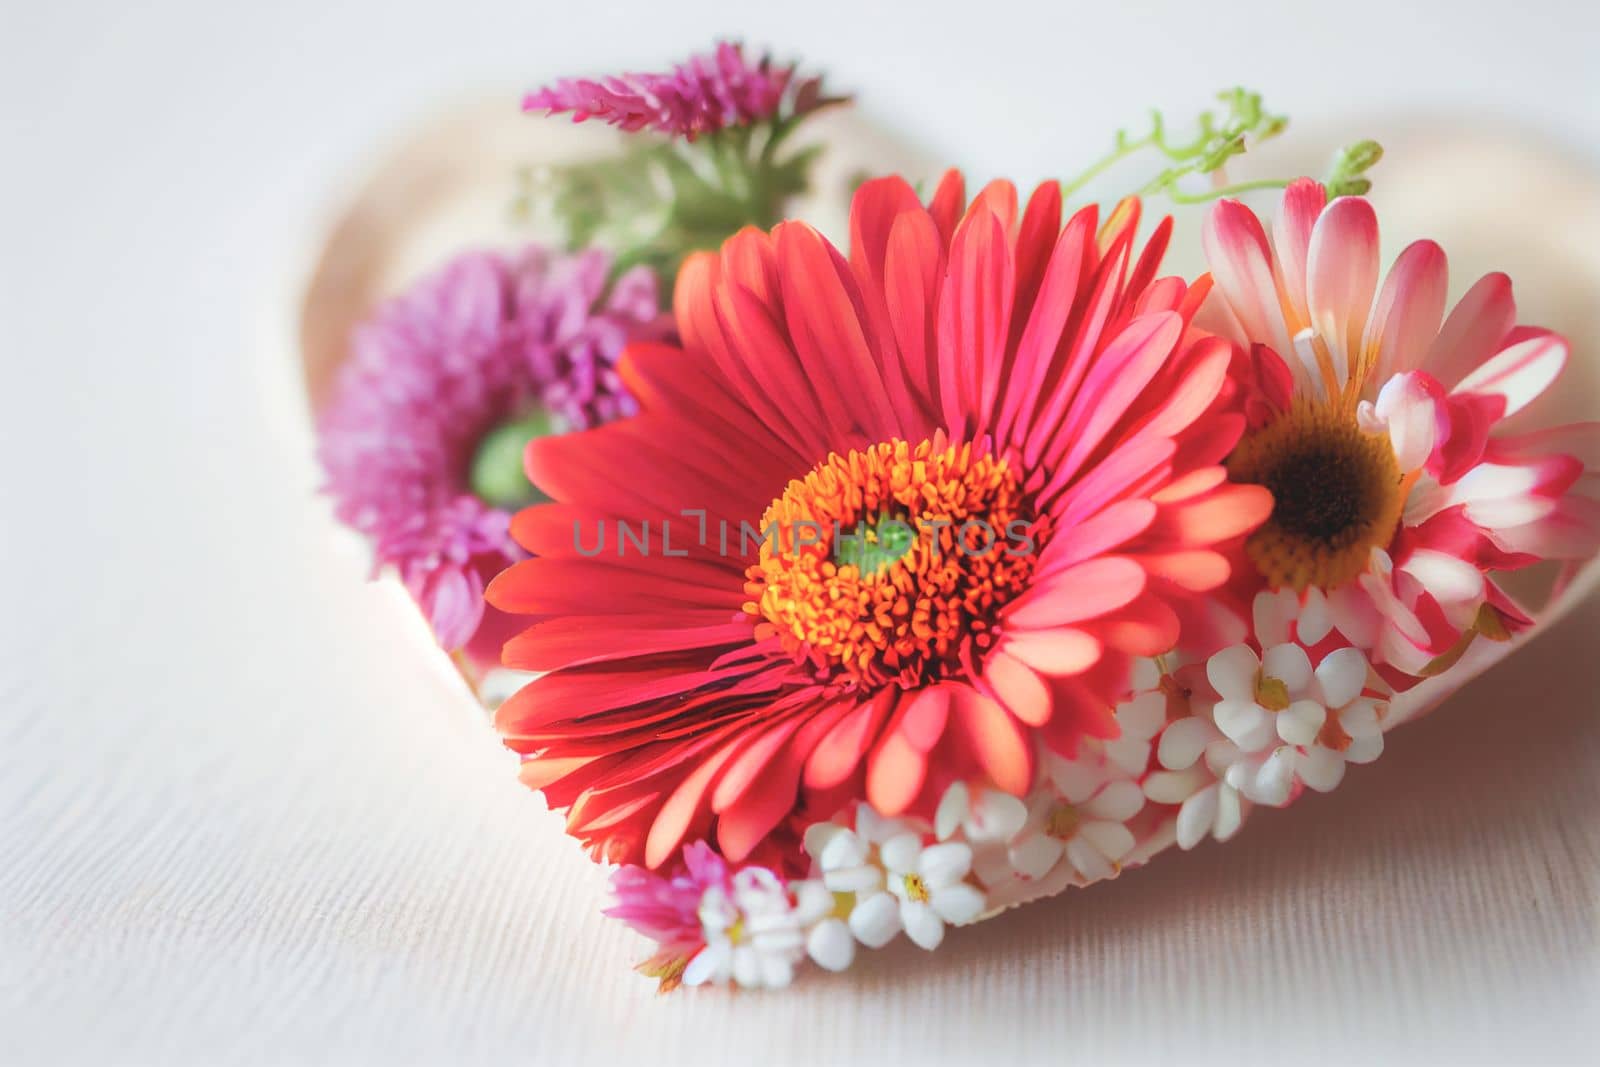 Close up shot of fresh flowers for Valentine's Day background with copy space. Gift ideas for Valentine. by FokasuArt